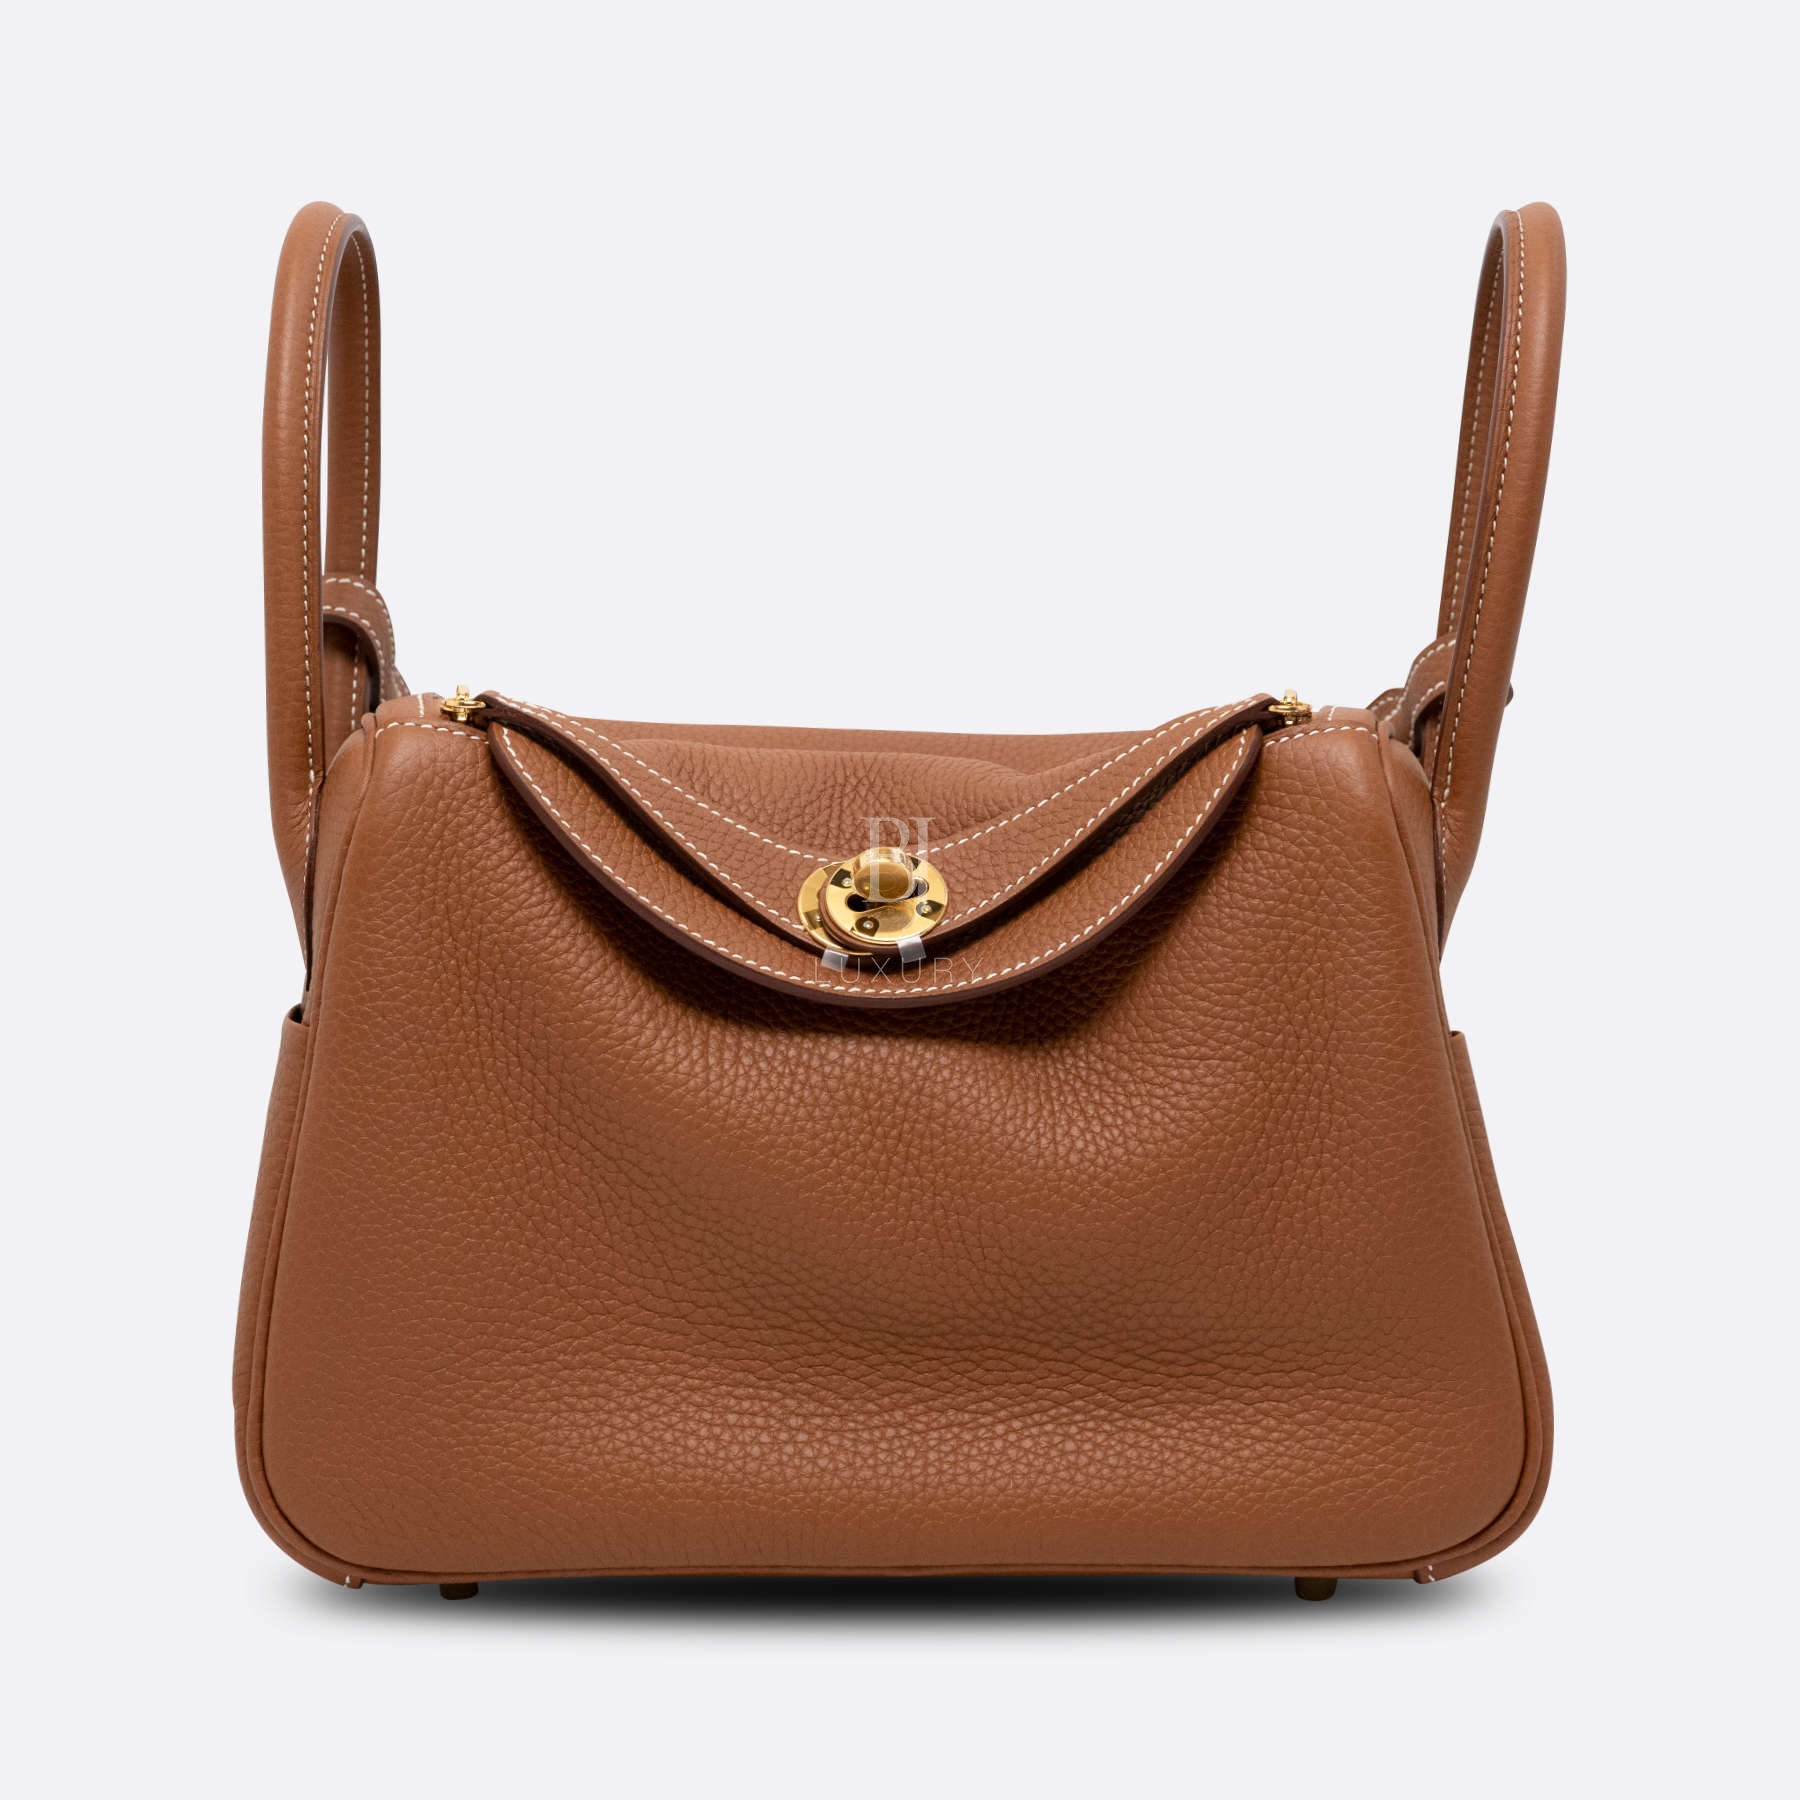 HERMES-LINDY-26-GOLD-CLEMENCE-4583 front.jpg